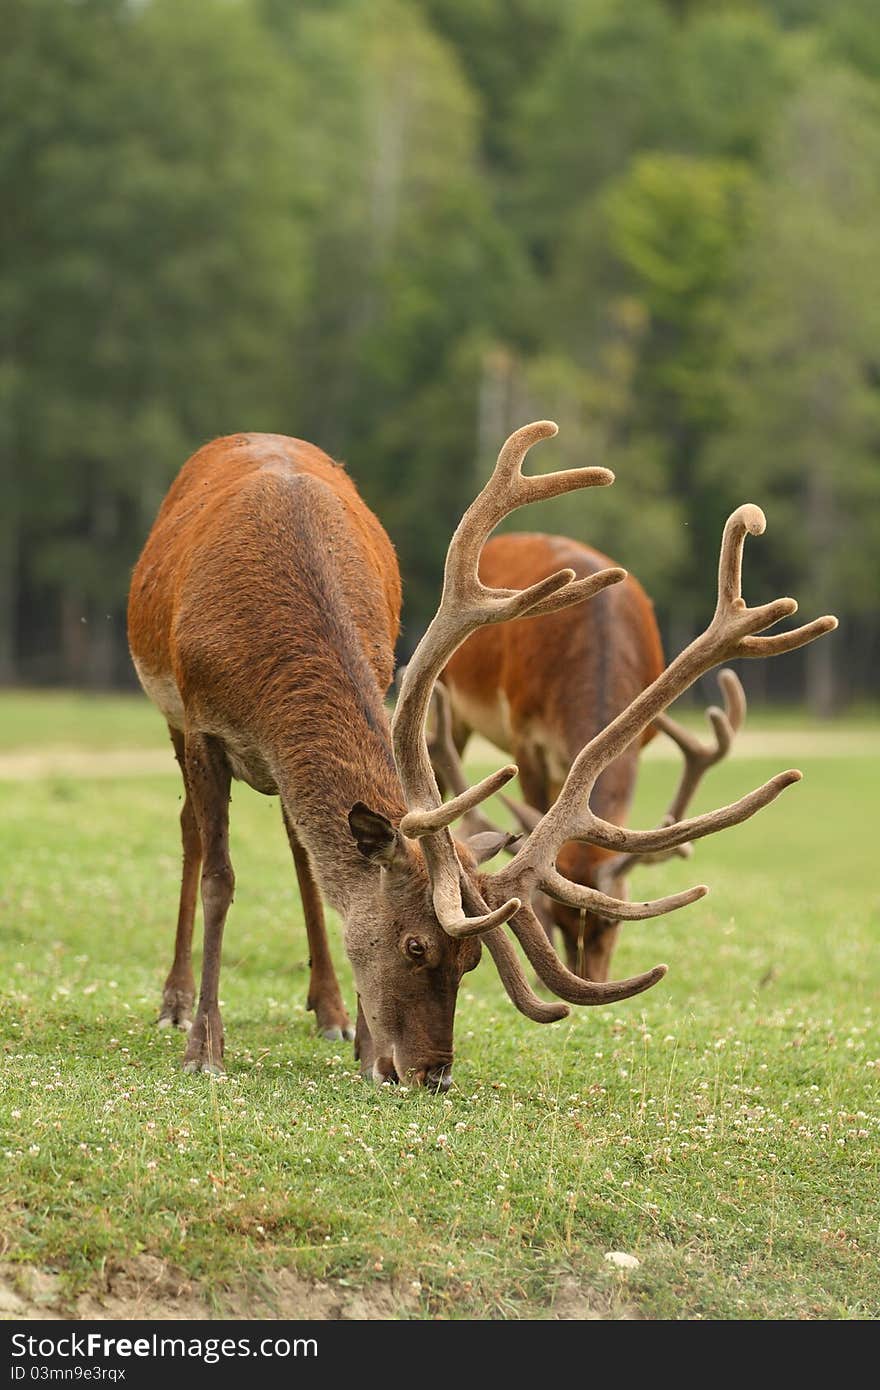 A view of two antlered deers in field